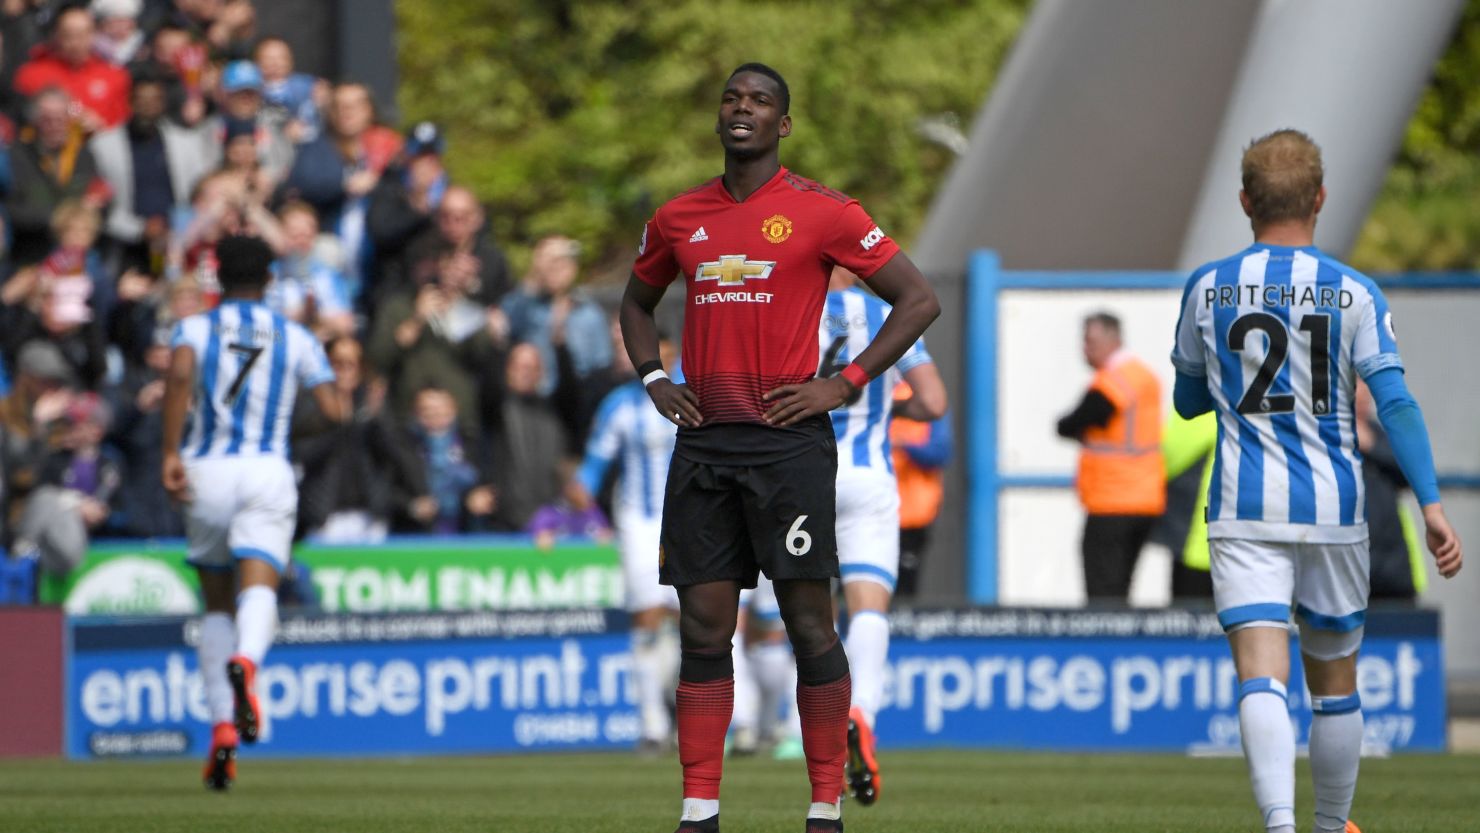 Manchester United was disappointing against Huddersfield 